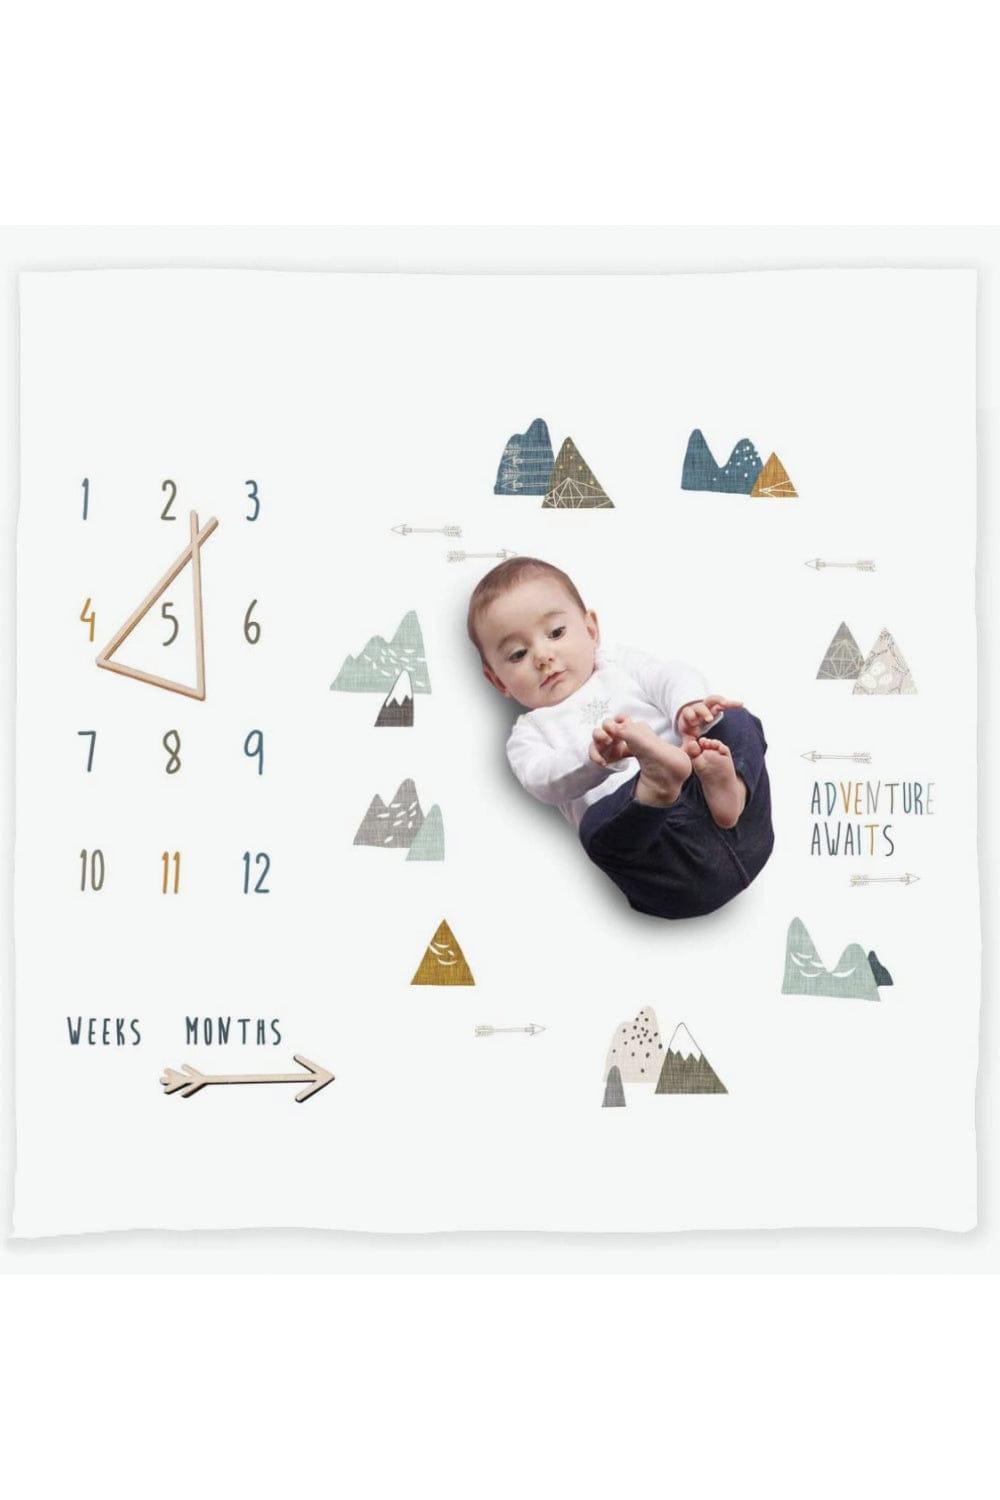 Sweet baby playing on a milestone blanket with a mountain adventure motif.